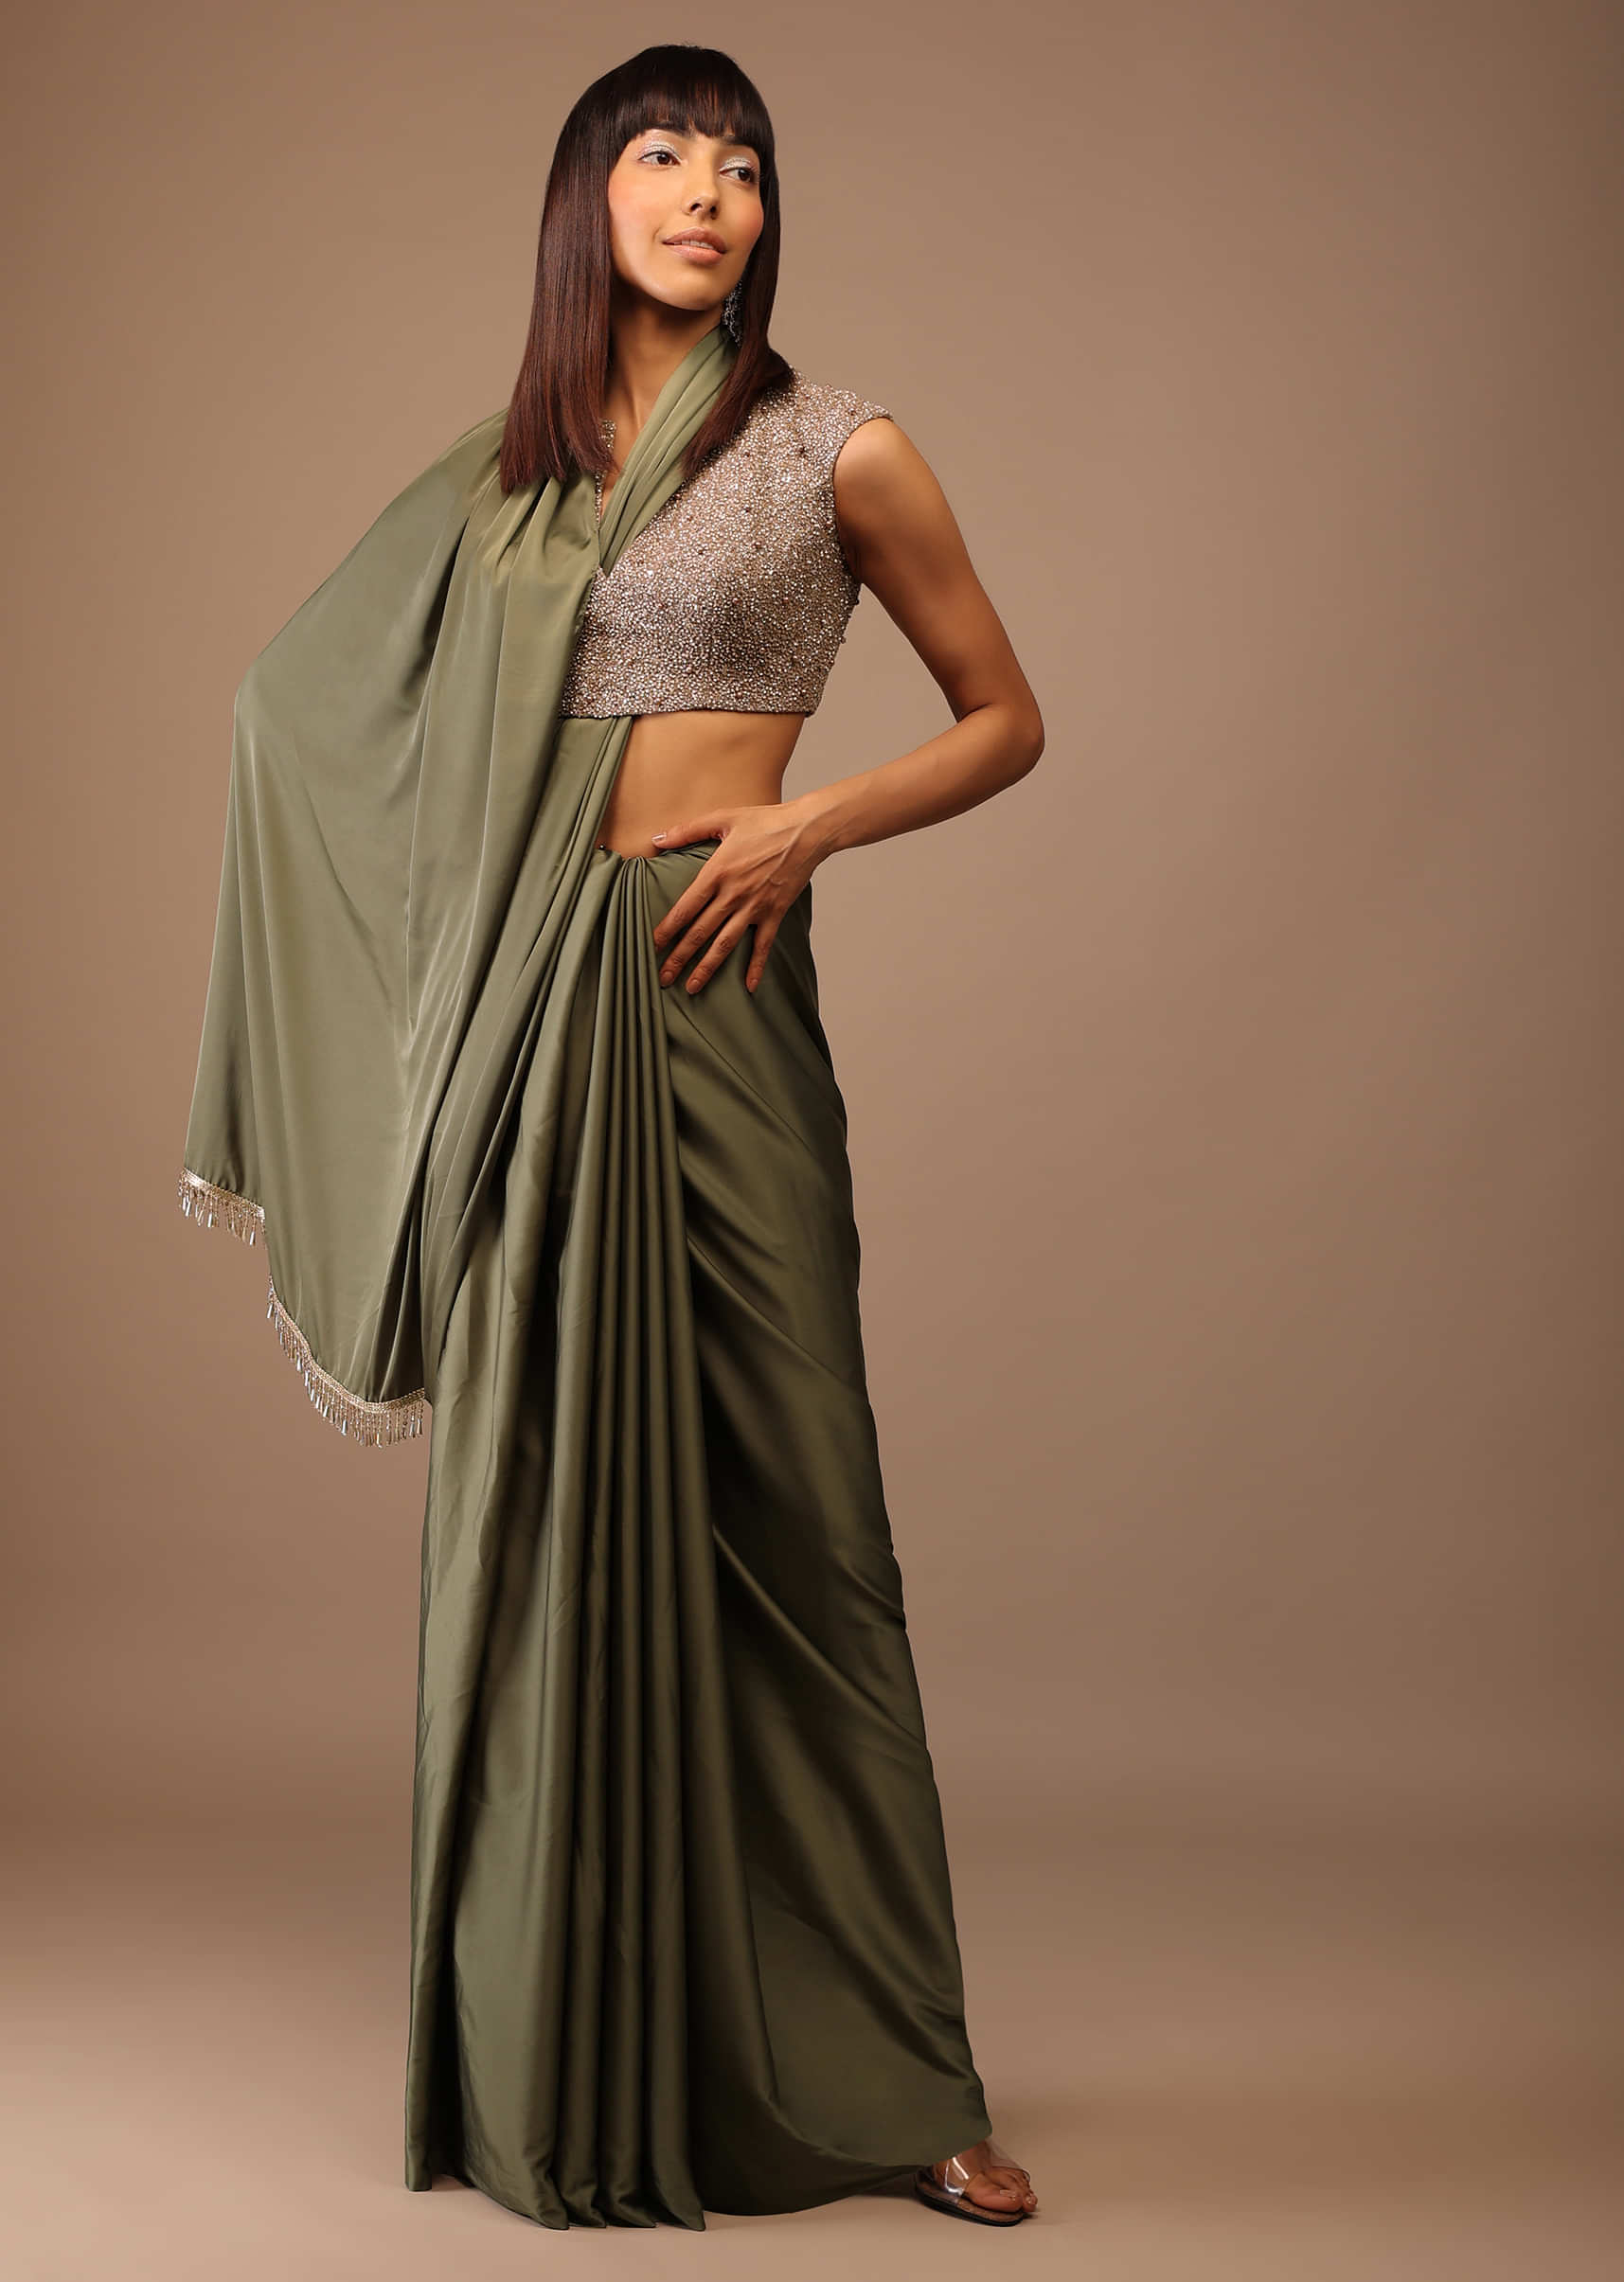 Moss Green Satin Saree With Fringes On Pallu Paired With Deep Neck Hand Embroidered Crop Top